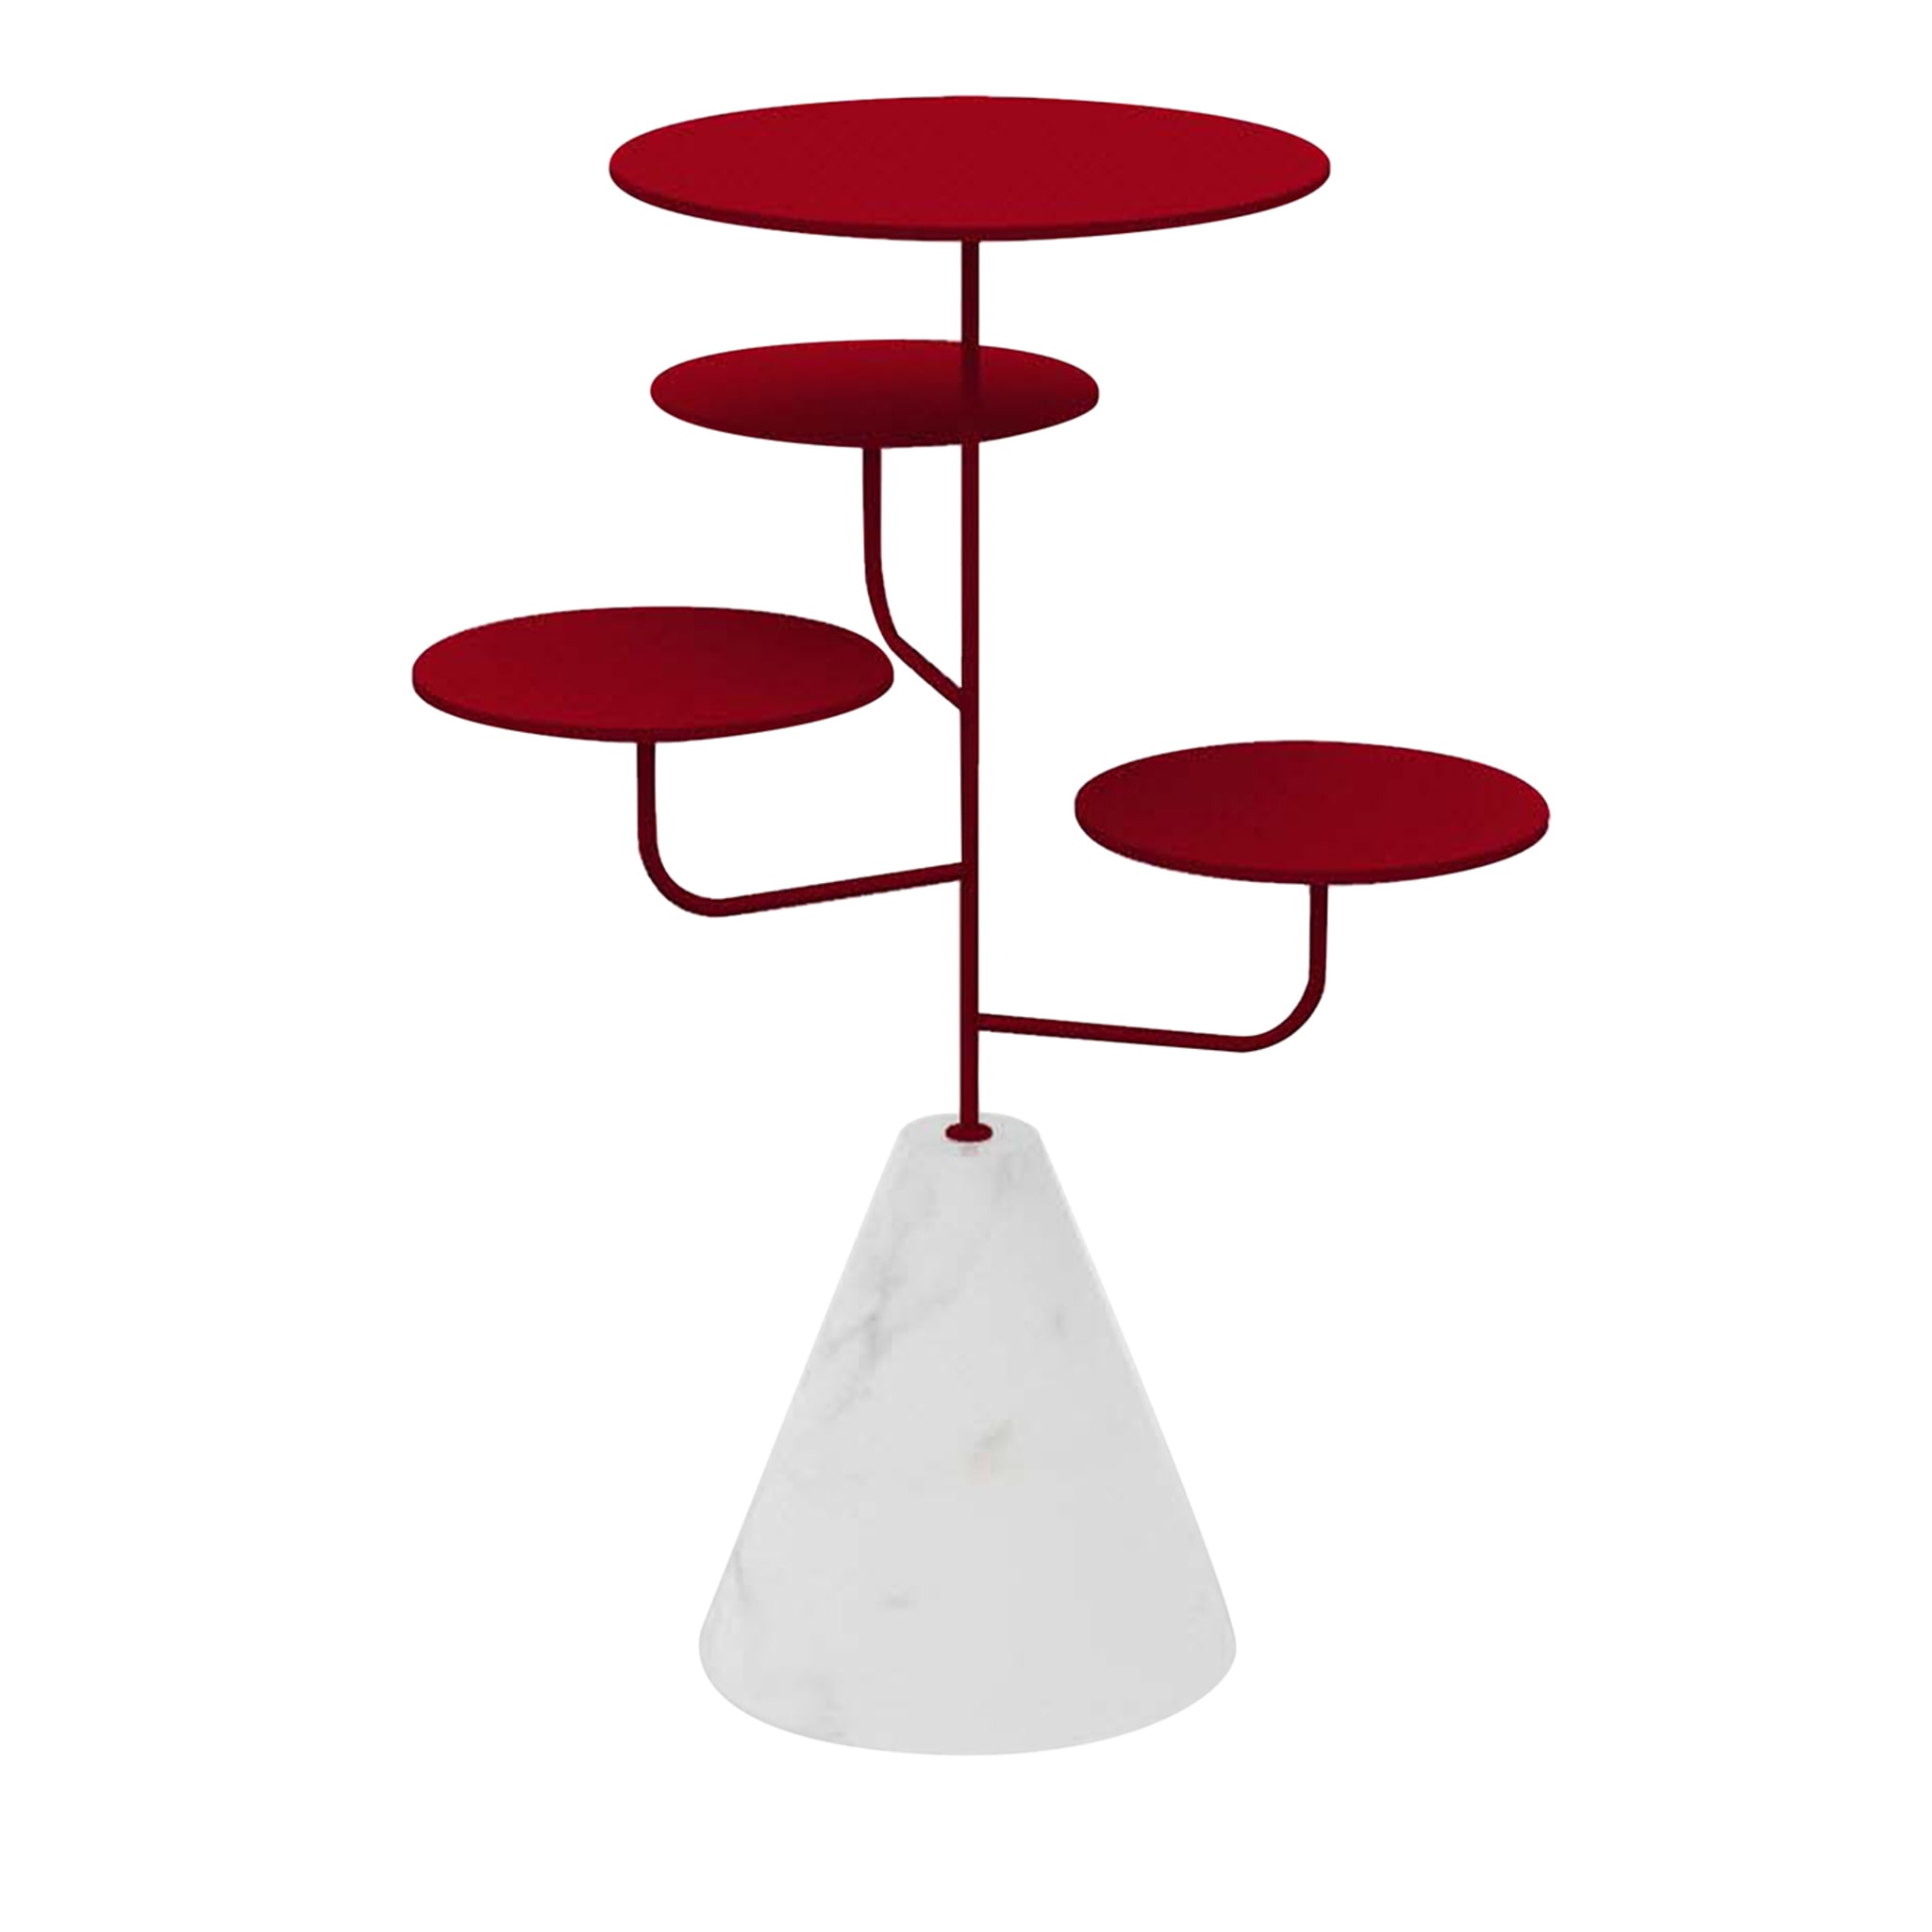 Condiviso 4-Tier Ruby Red/White Carrara Serving Stand - Main view